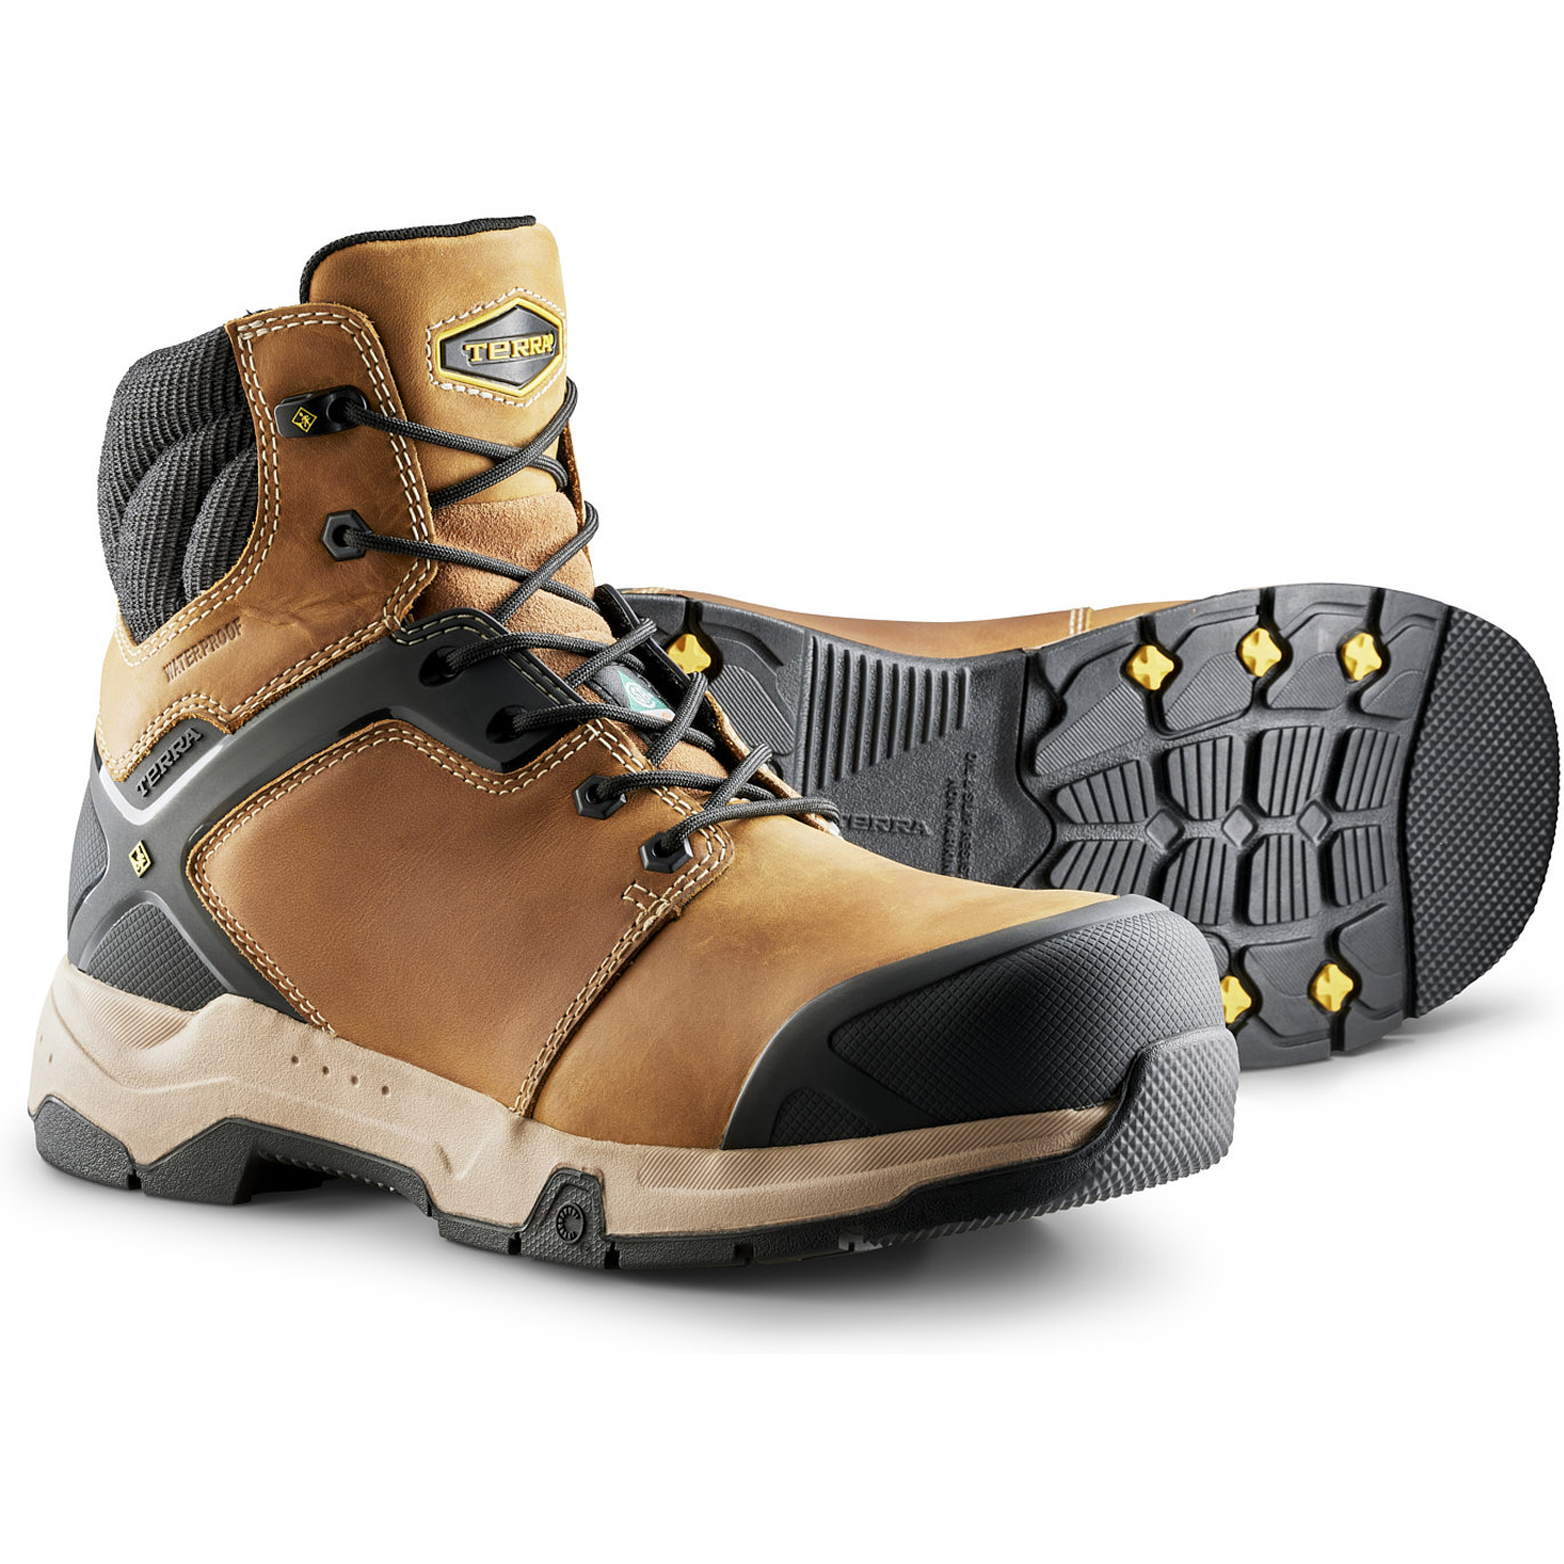 Terra Men's Carbine 6" Comp Toe WP Safety  Work Boot -Wheat- 8395WT  - Overlook Boots